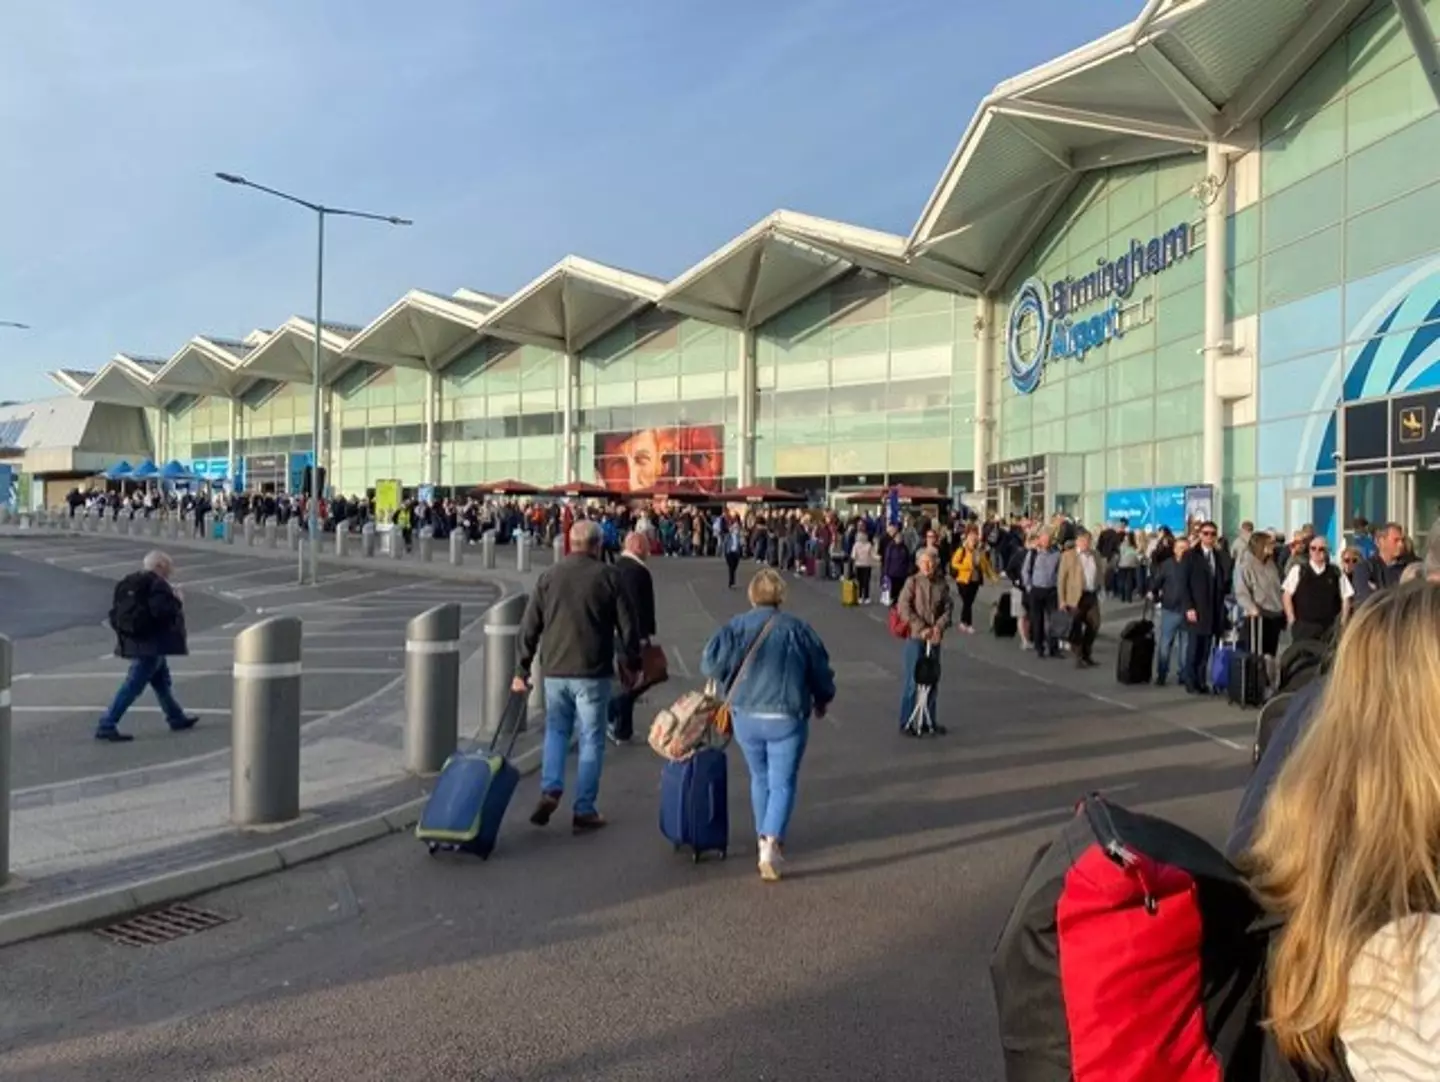 Thousands queued up outside Birmingham Airport this morning.